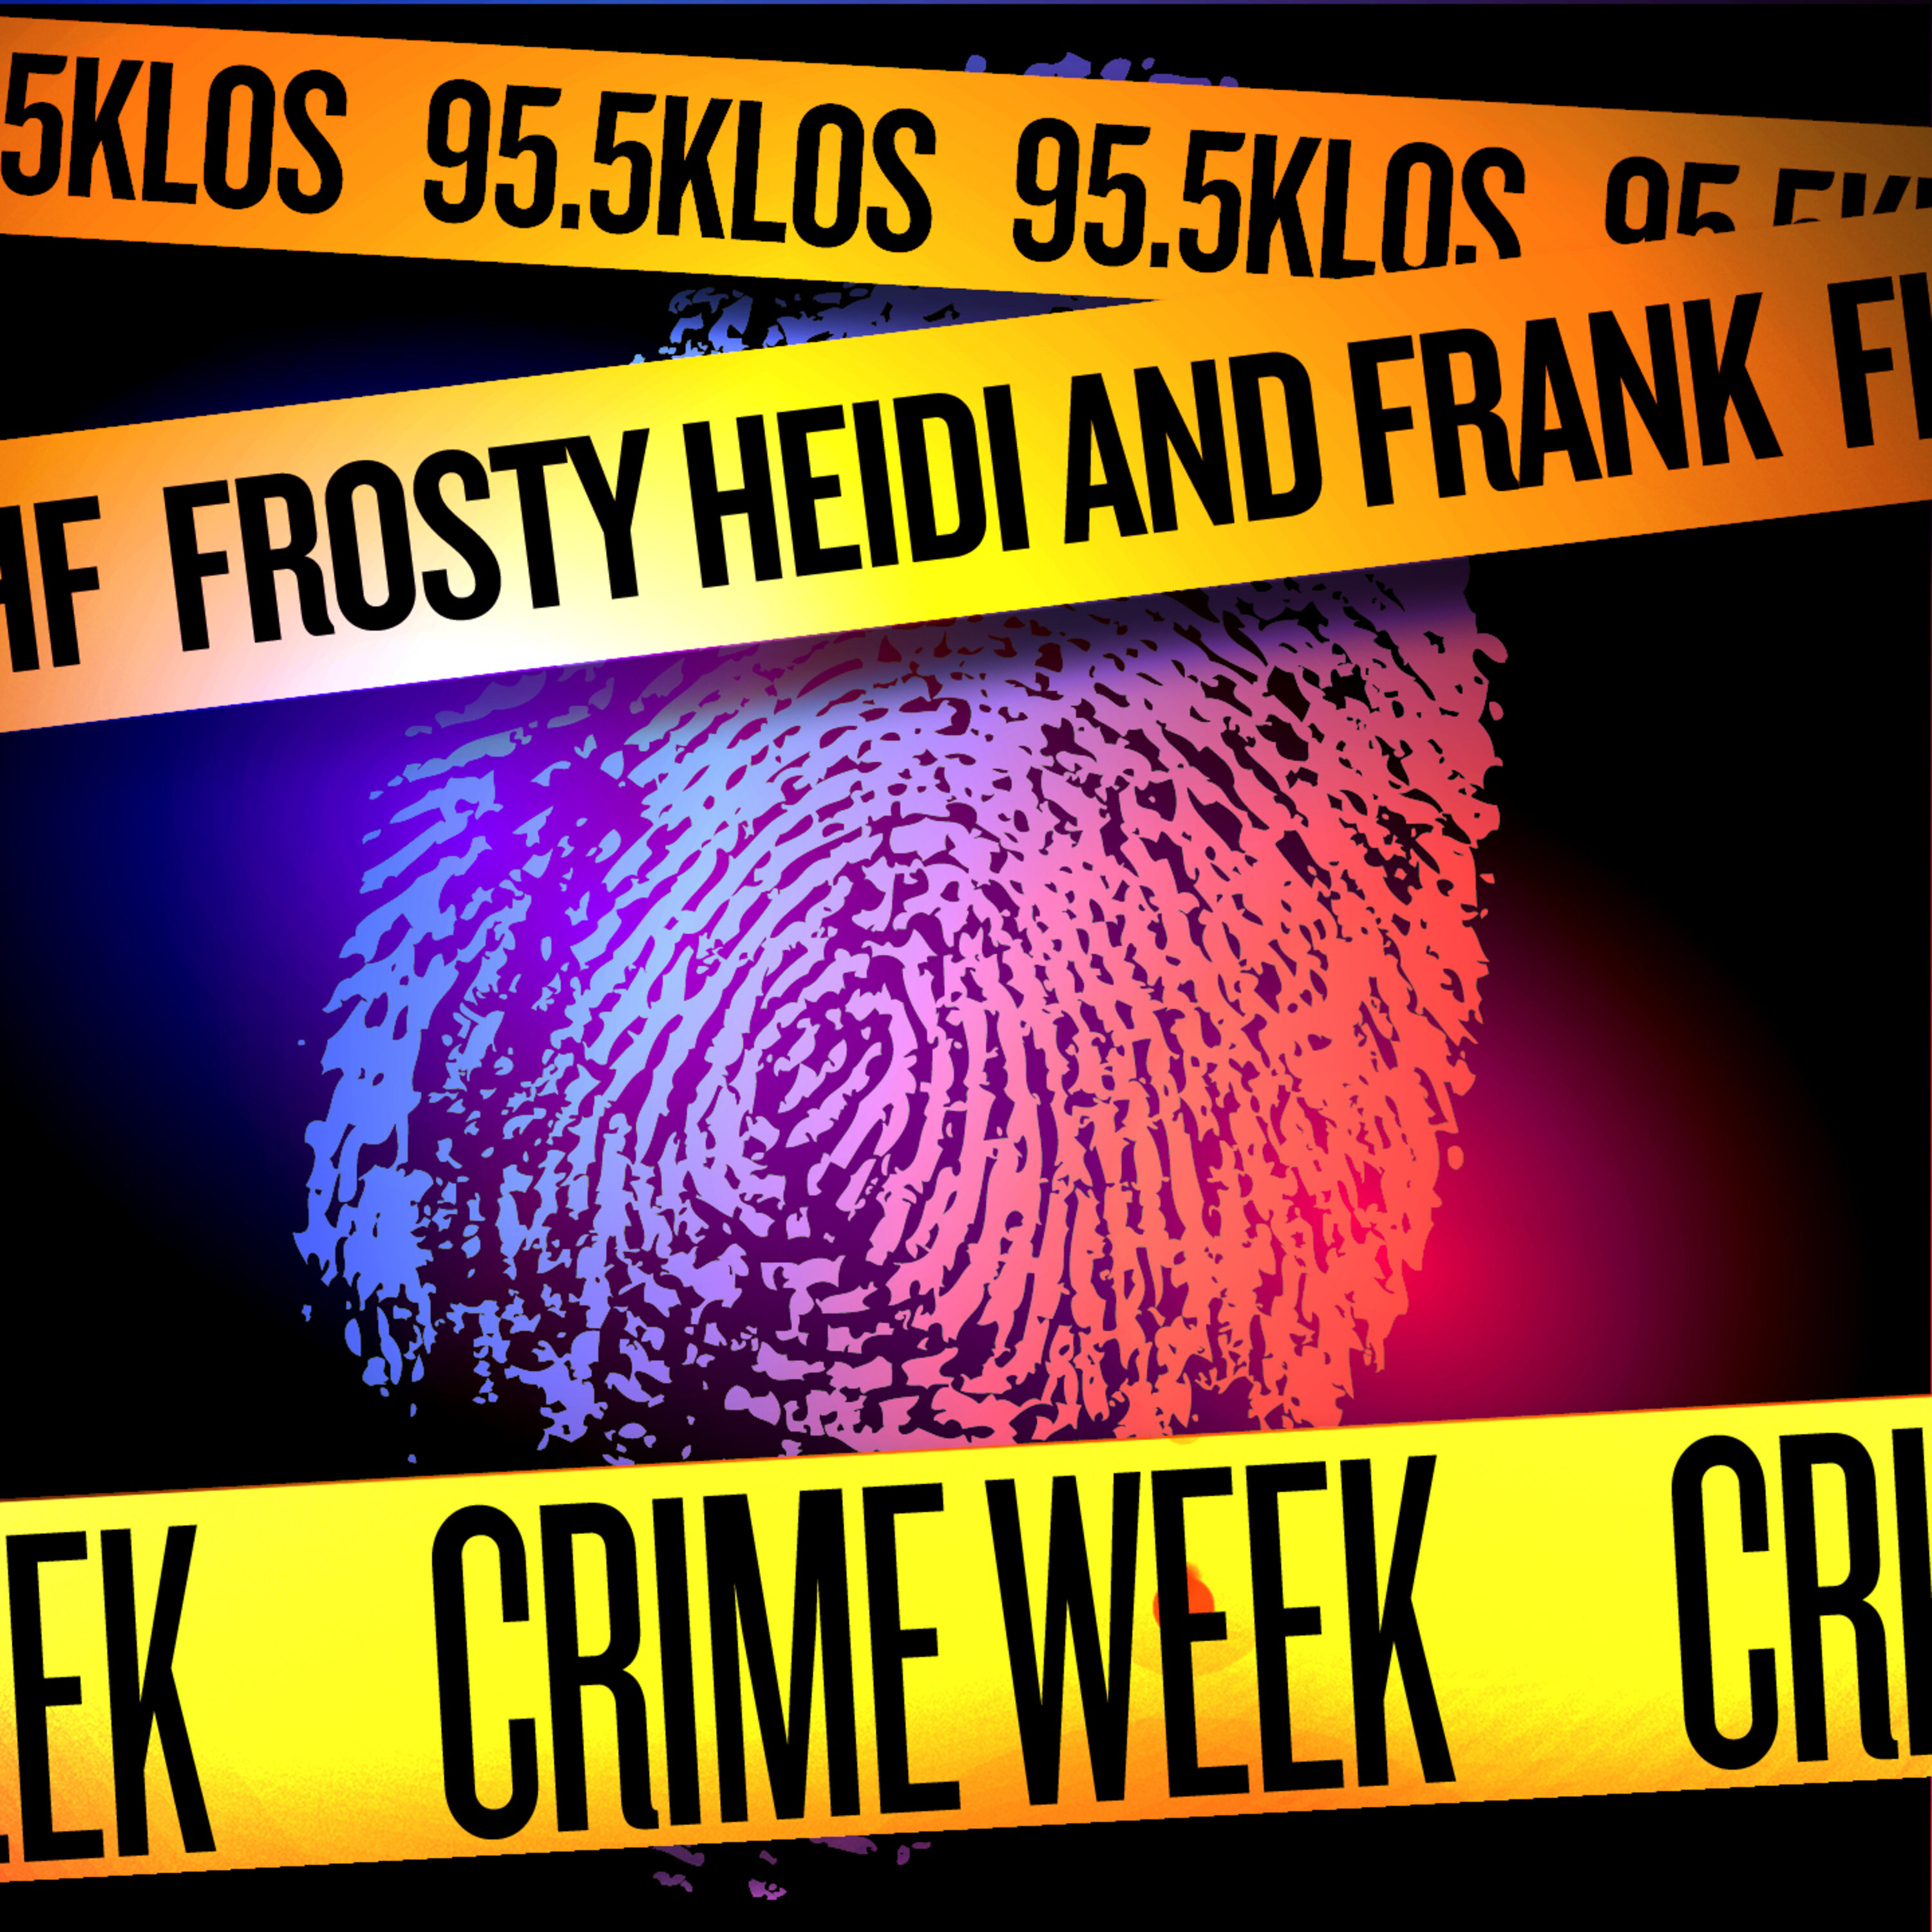 FHF: Crime Week - Jailed In Another Country and Breaking The Law And Got Away With It